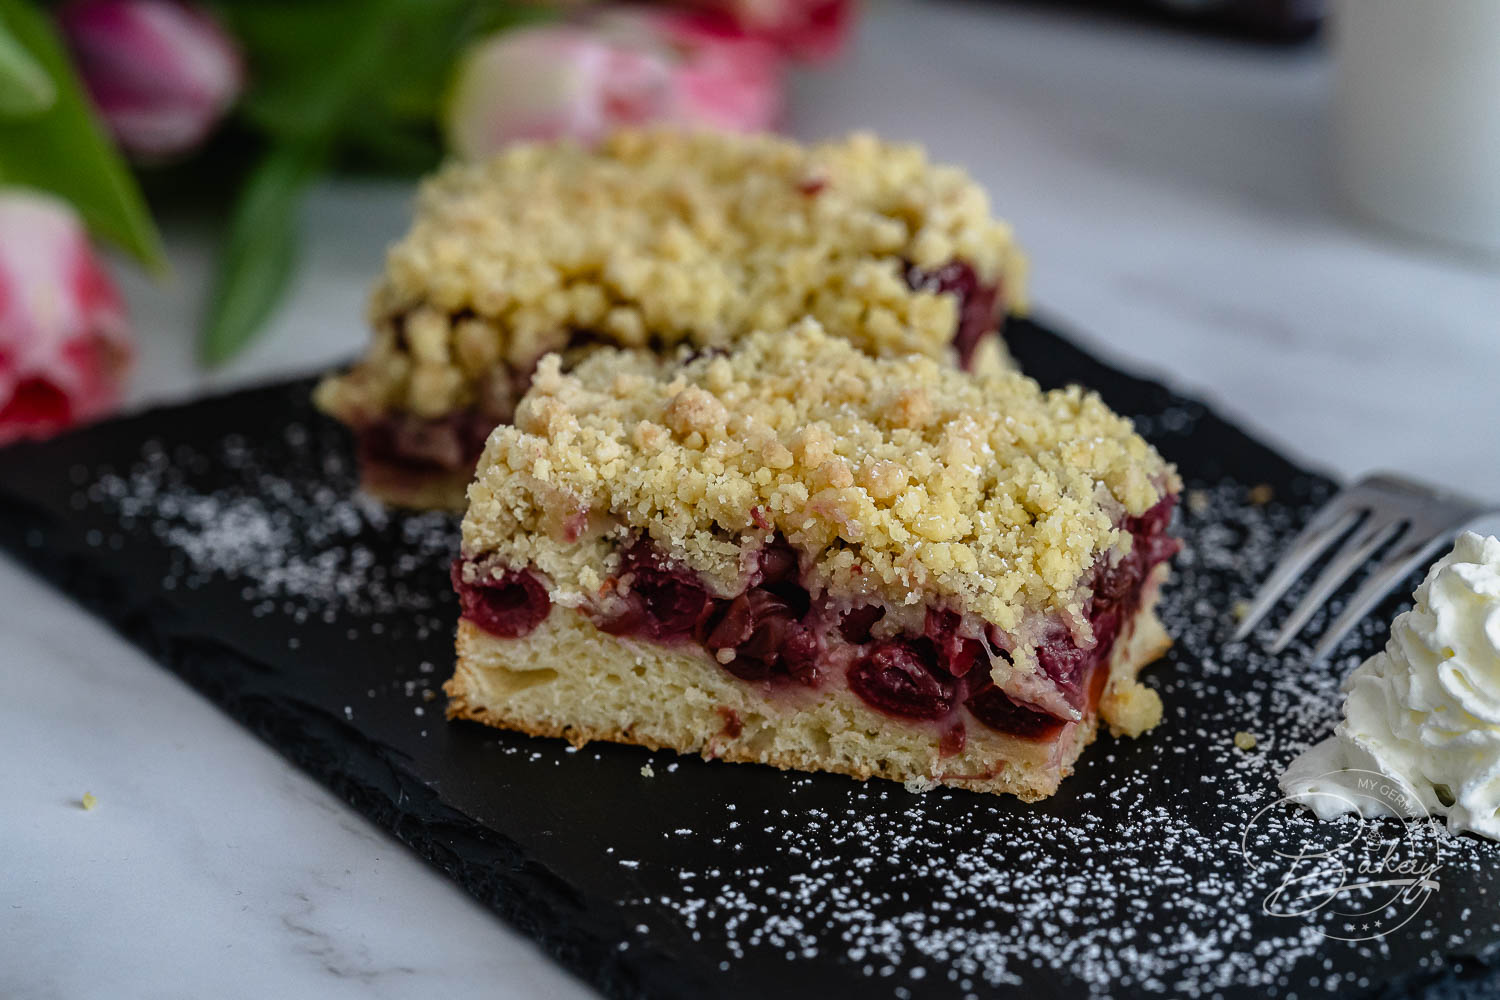 Cherry crumble cake recipe - delicious and easy yeast cake - Delicious cherry crumble cake recipe for yeast cake and crumble cake. Cake with butter crumbles and sour cherries, cherries and morello cherries - quick and easy instructions - delicious yeast cake - sheet cake recipe - simple cake with dry yeast